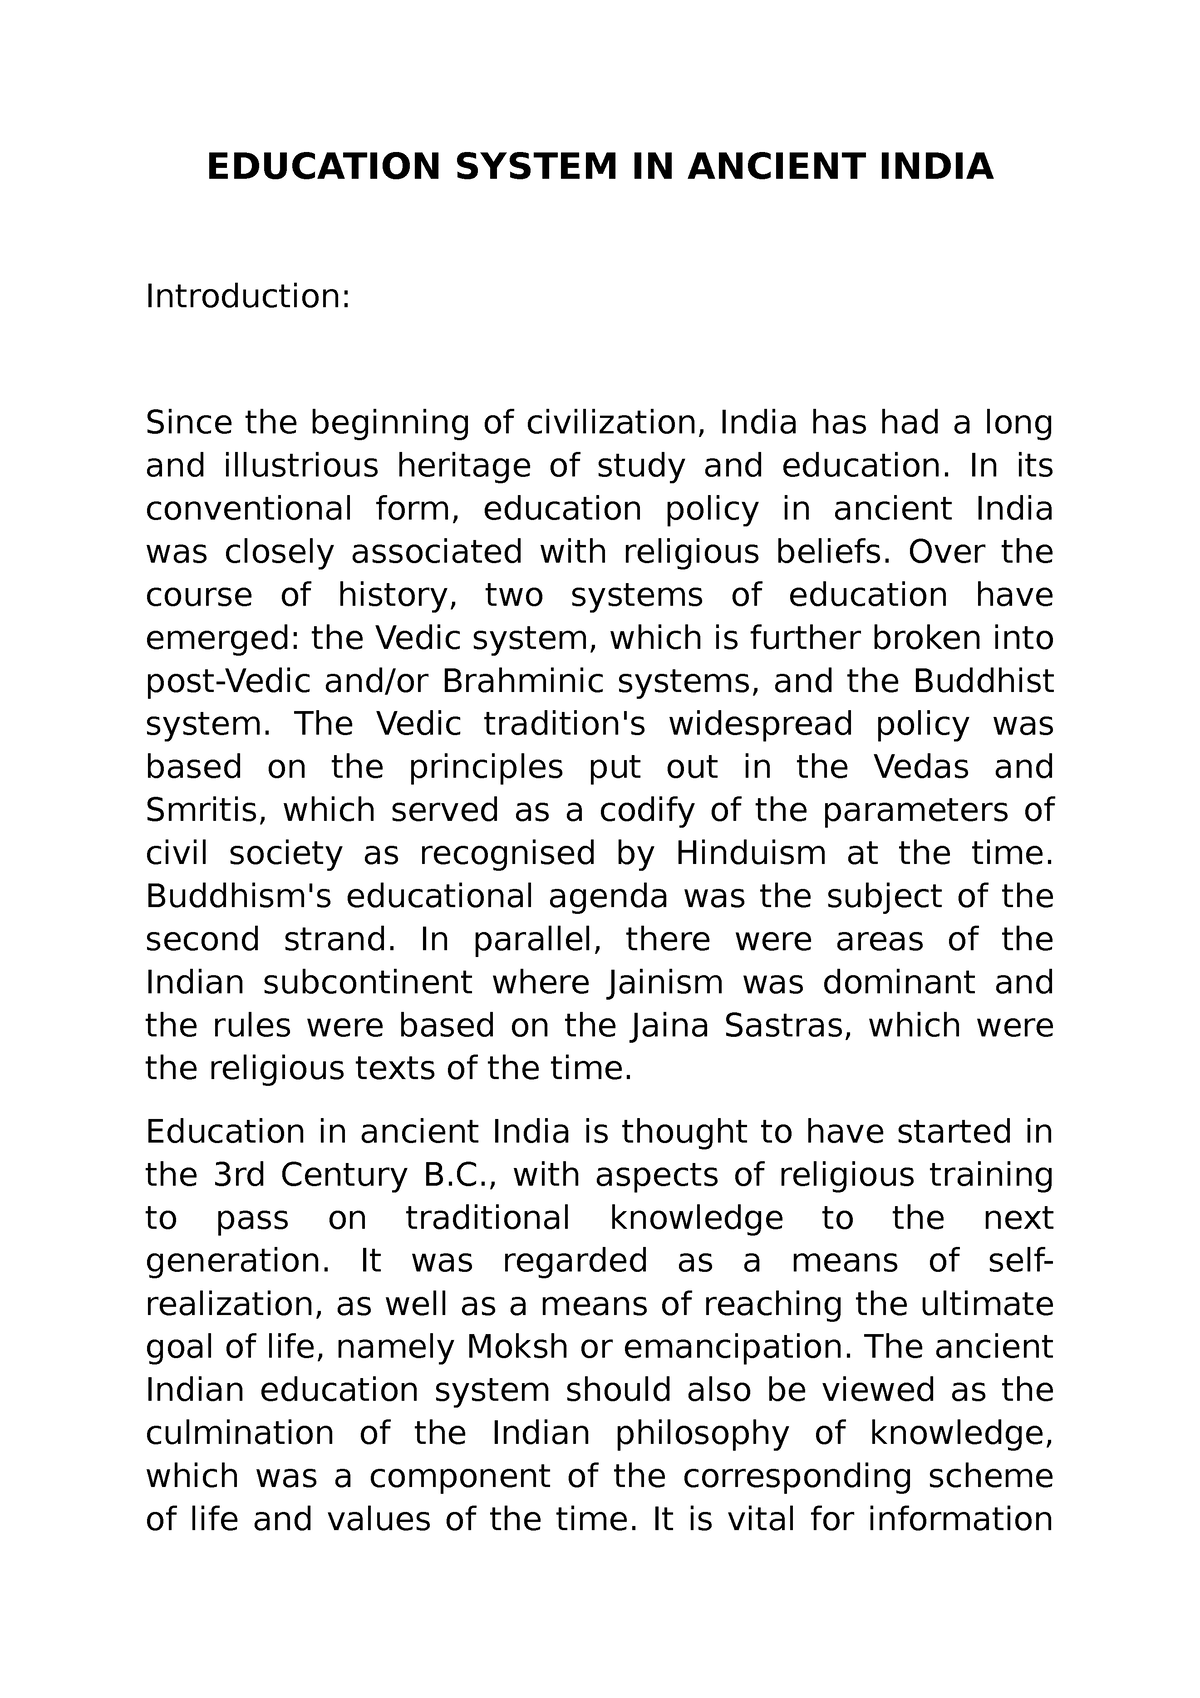 essay on ancient indian education system